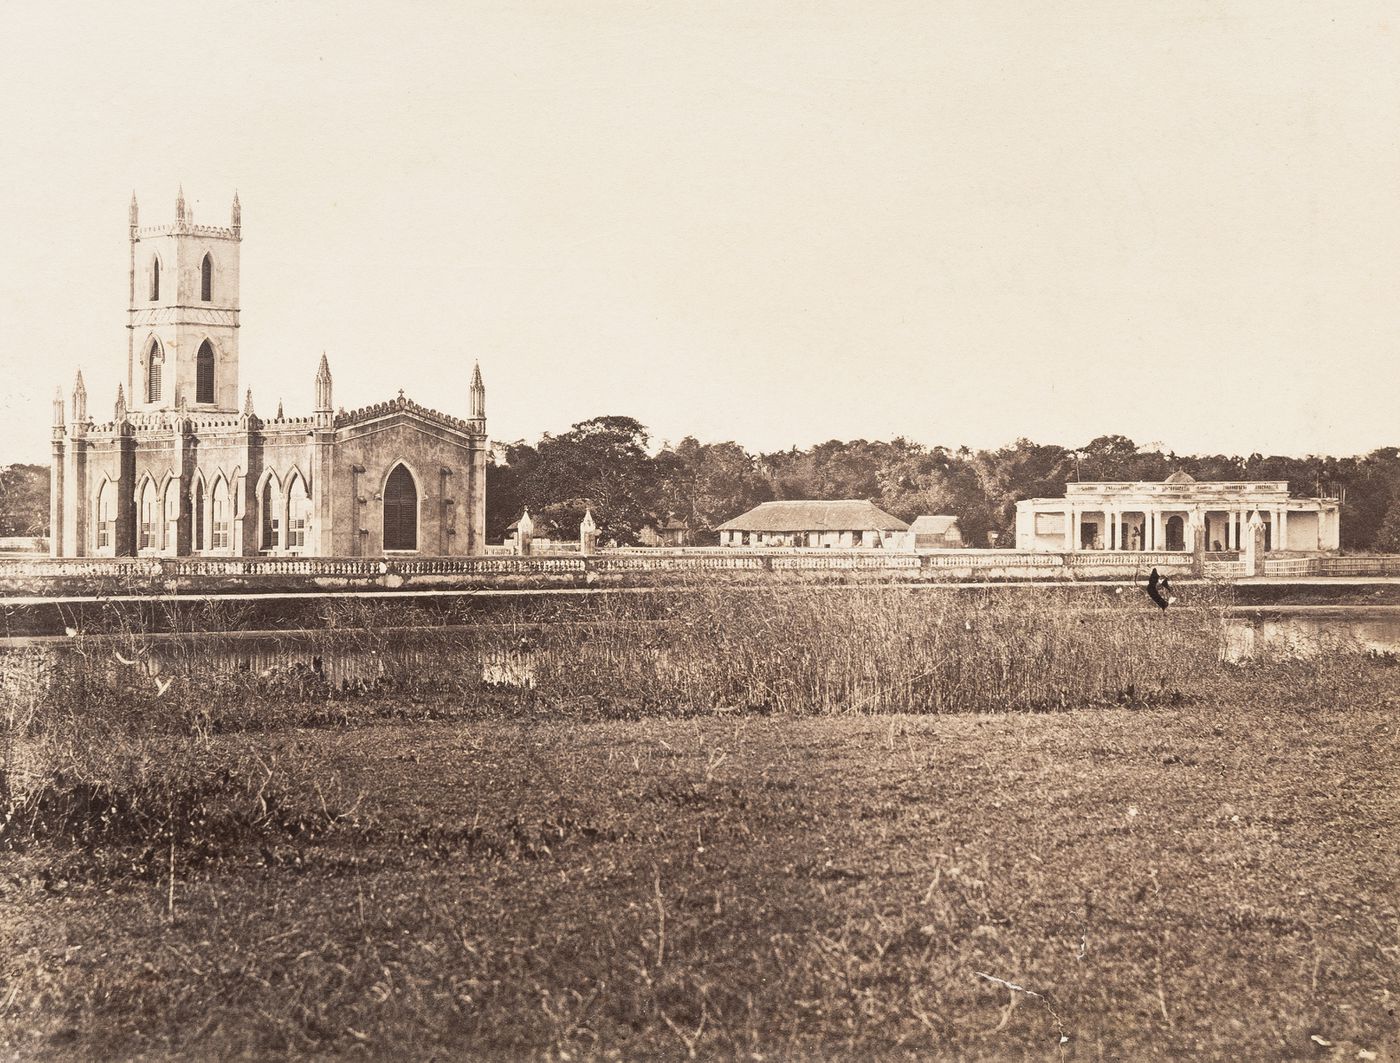 View of the Sudder Station Church, Sylhet, India (now in Bangladesh)